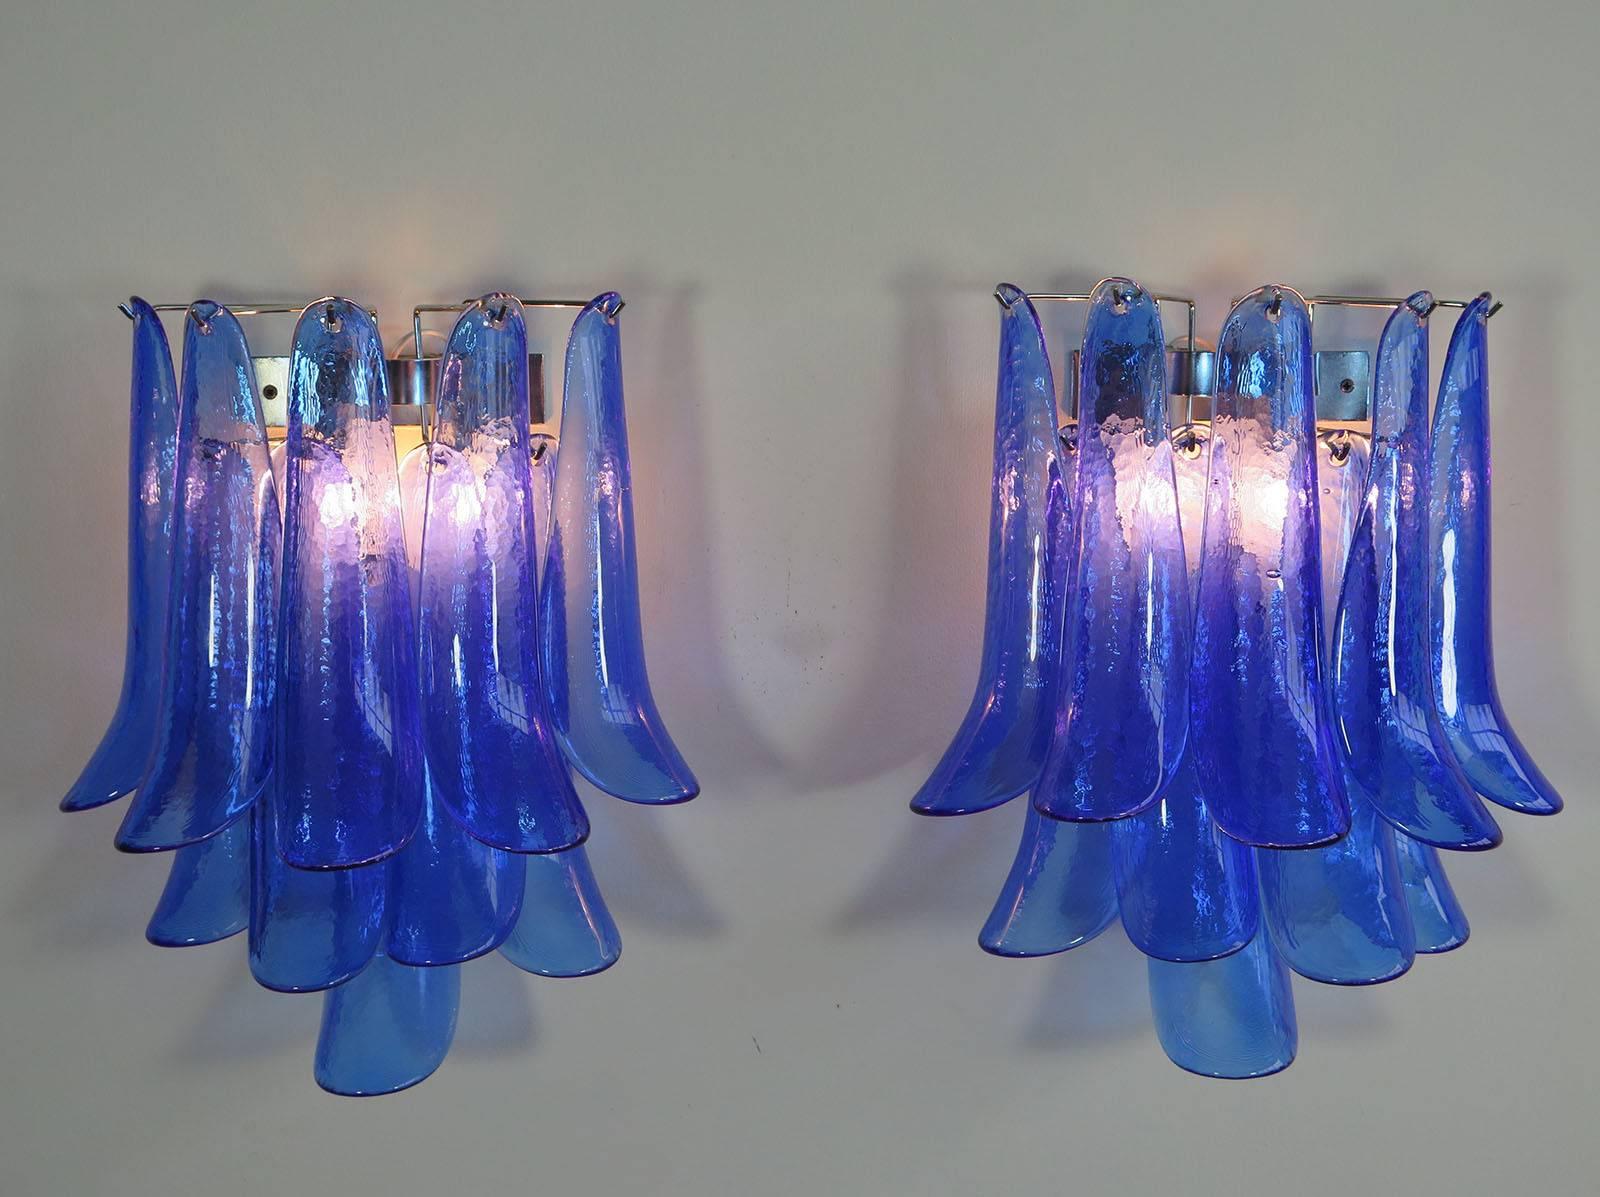 Pair of stunning Mazzega Italian Murano wall lights.

The lights have ten blue glass petals (for each applique) in a chrome frame and are in excellent condition, but the chrome has normal signs of wear and tear due to his age.

Light bulbs: